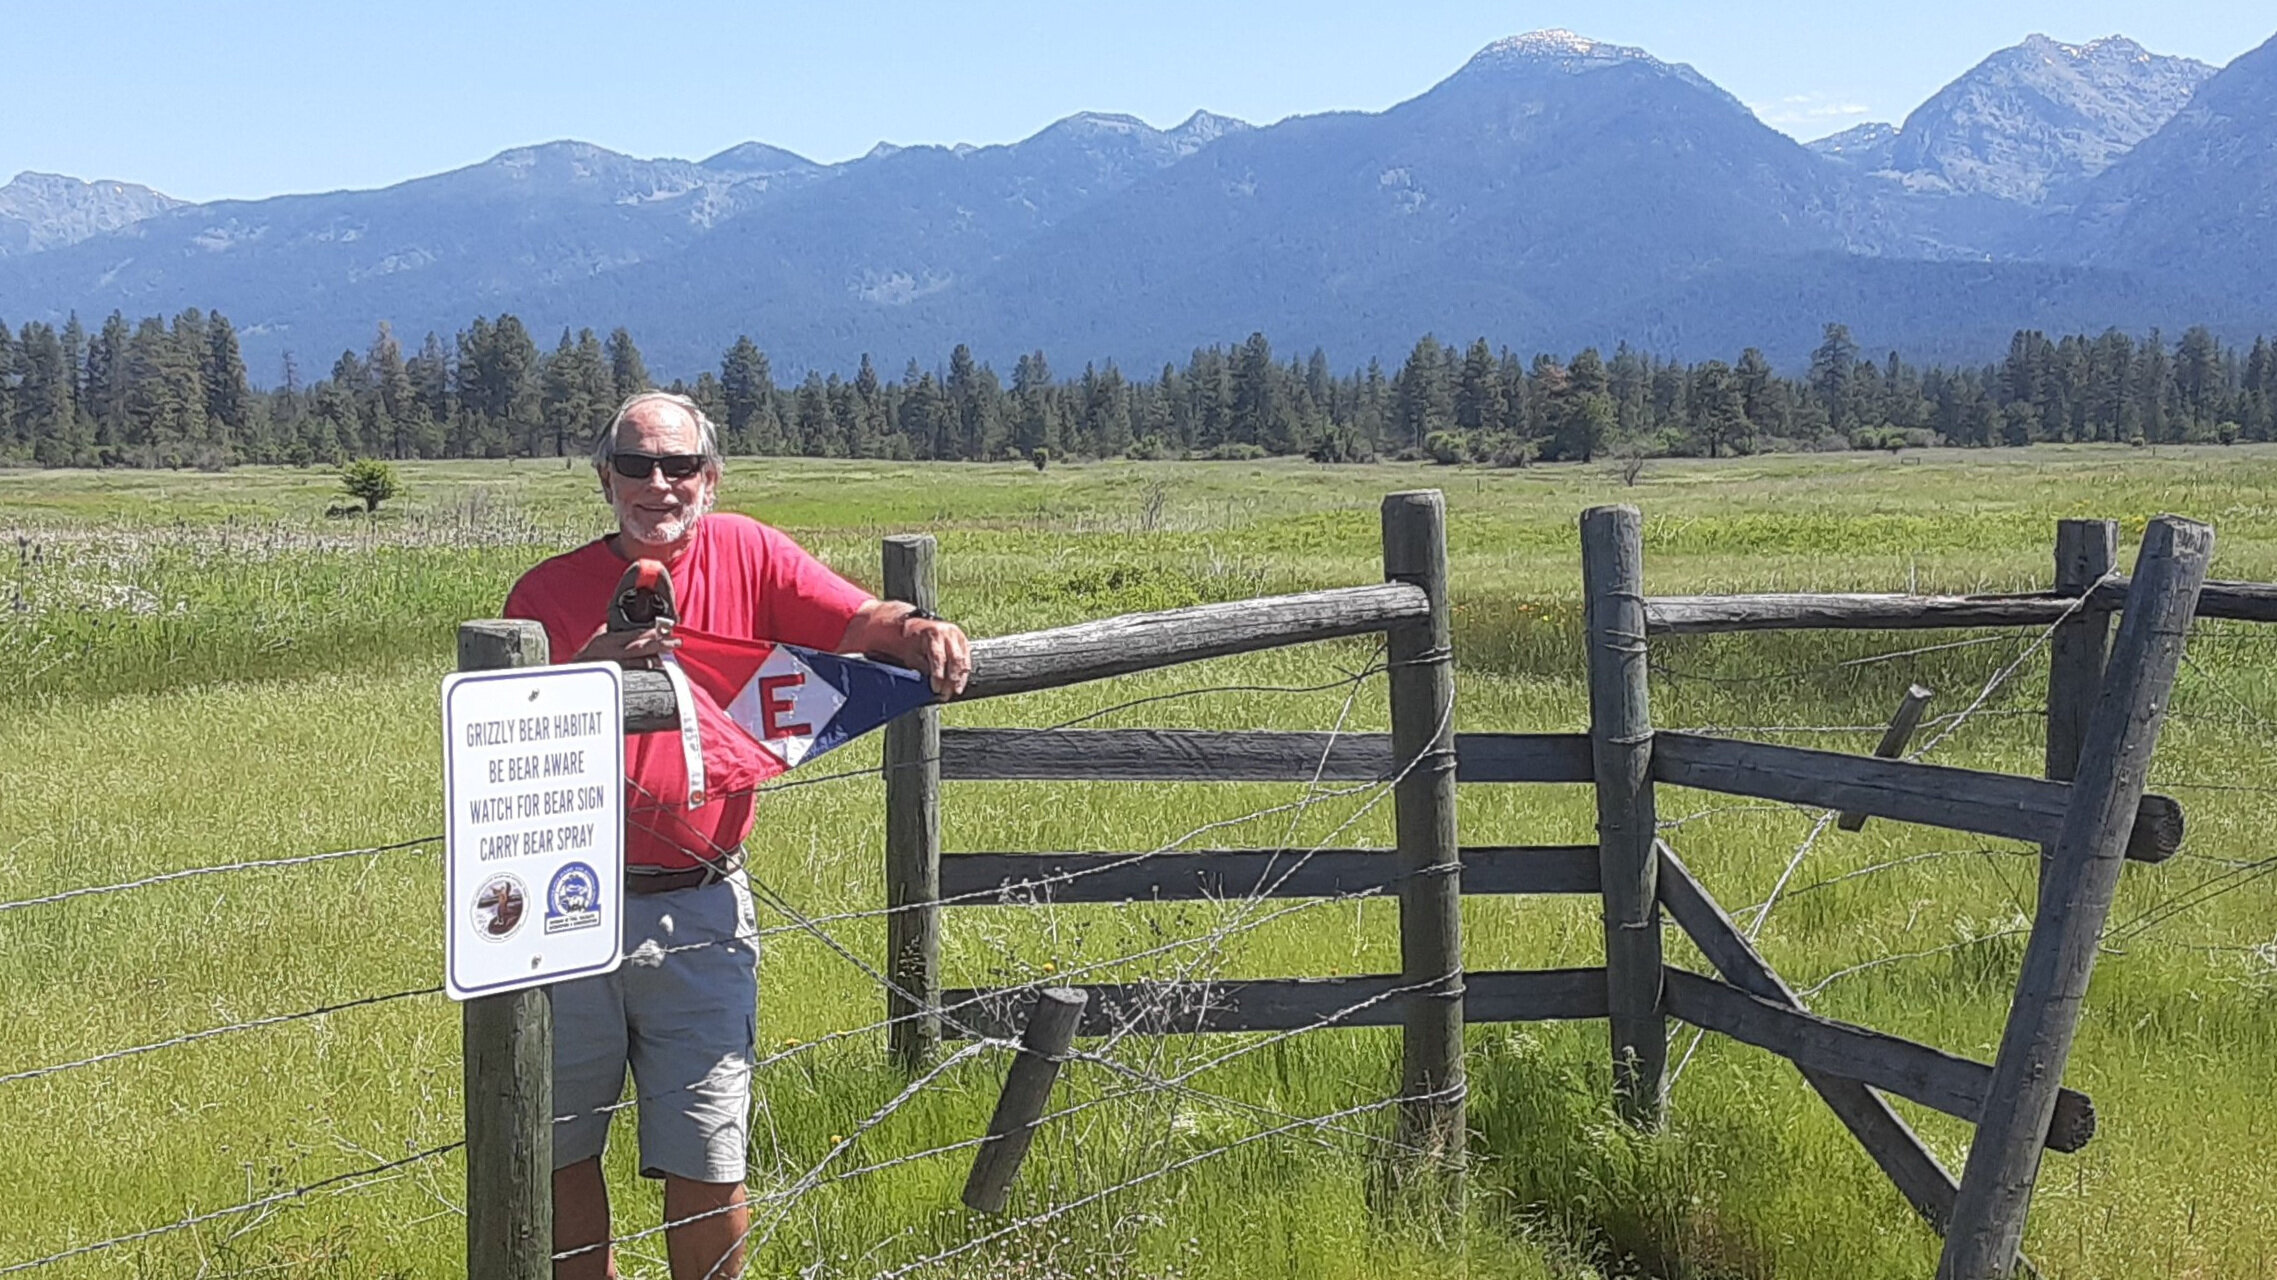  Scott braves bear country in Montana to show his EYC pride 